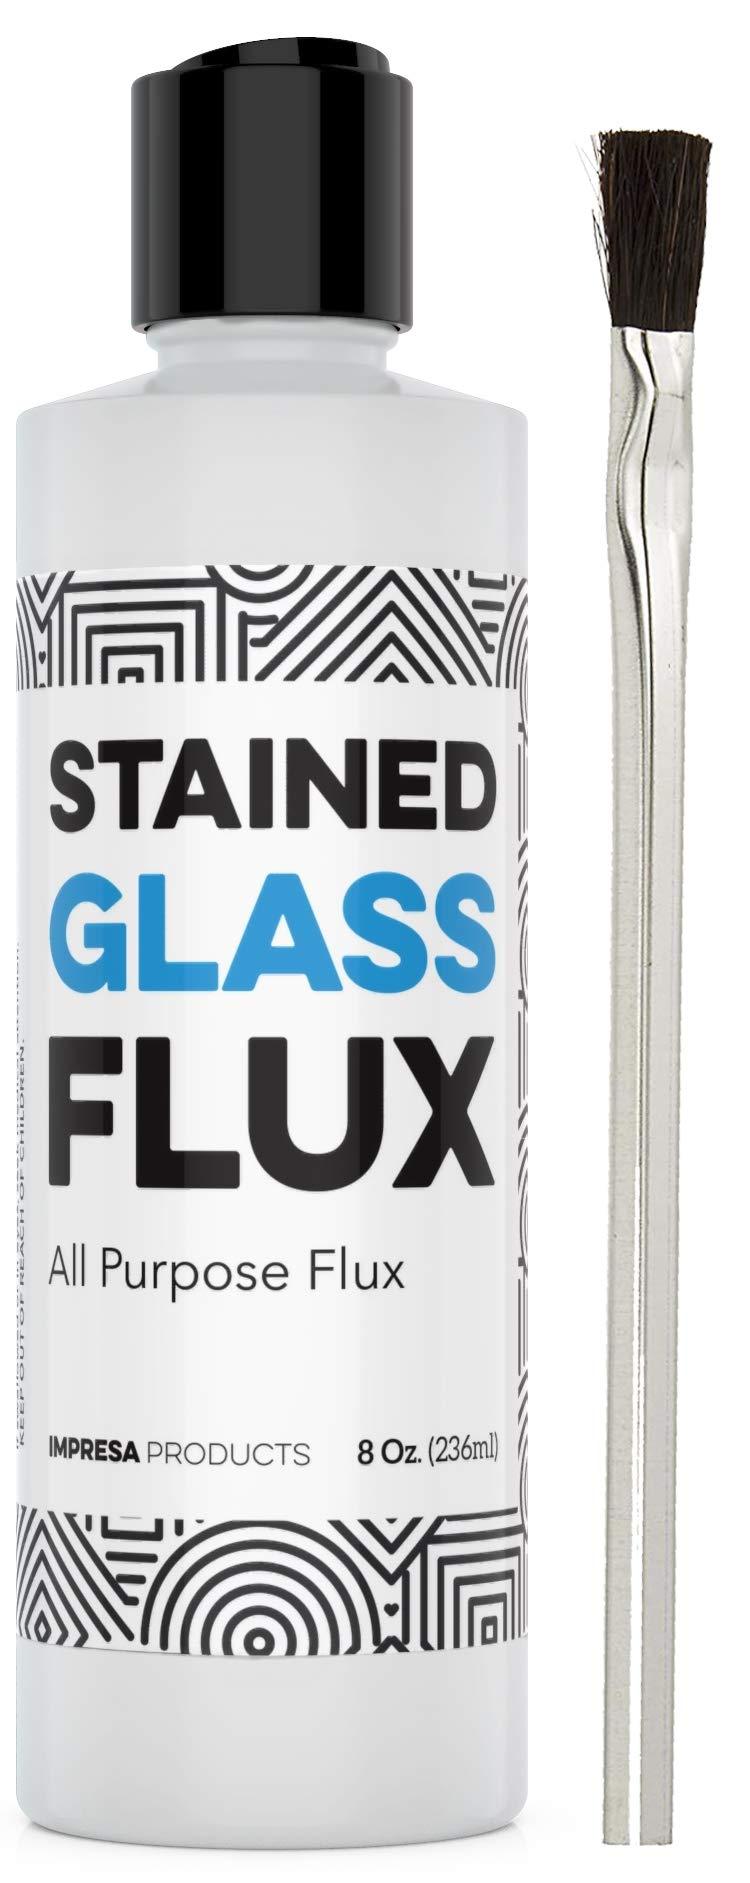  [AUSTRALIA] - 8oz Liquid Zinc Flux for Stained Glass, Soldering Work, Glass Repair and more - Easy Clean Up - Made in USA